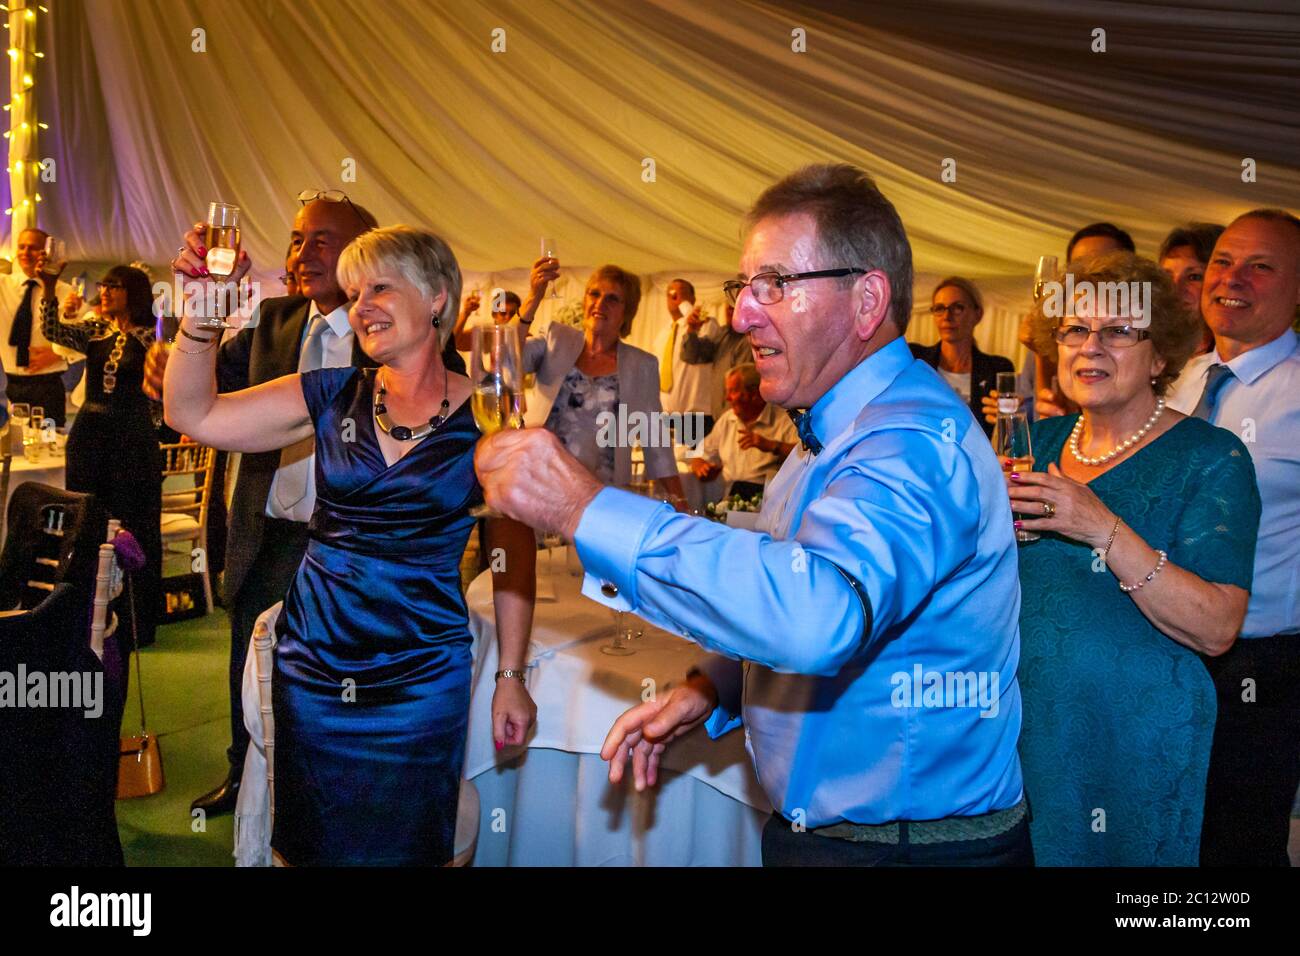 The wedding party raises champagne glasses to cheers. British Wedding in South Cambridgeshire, England Stock Photo